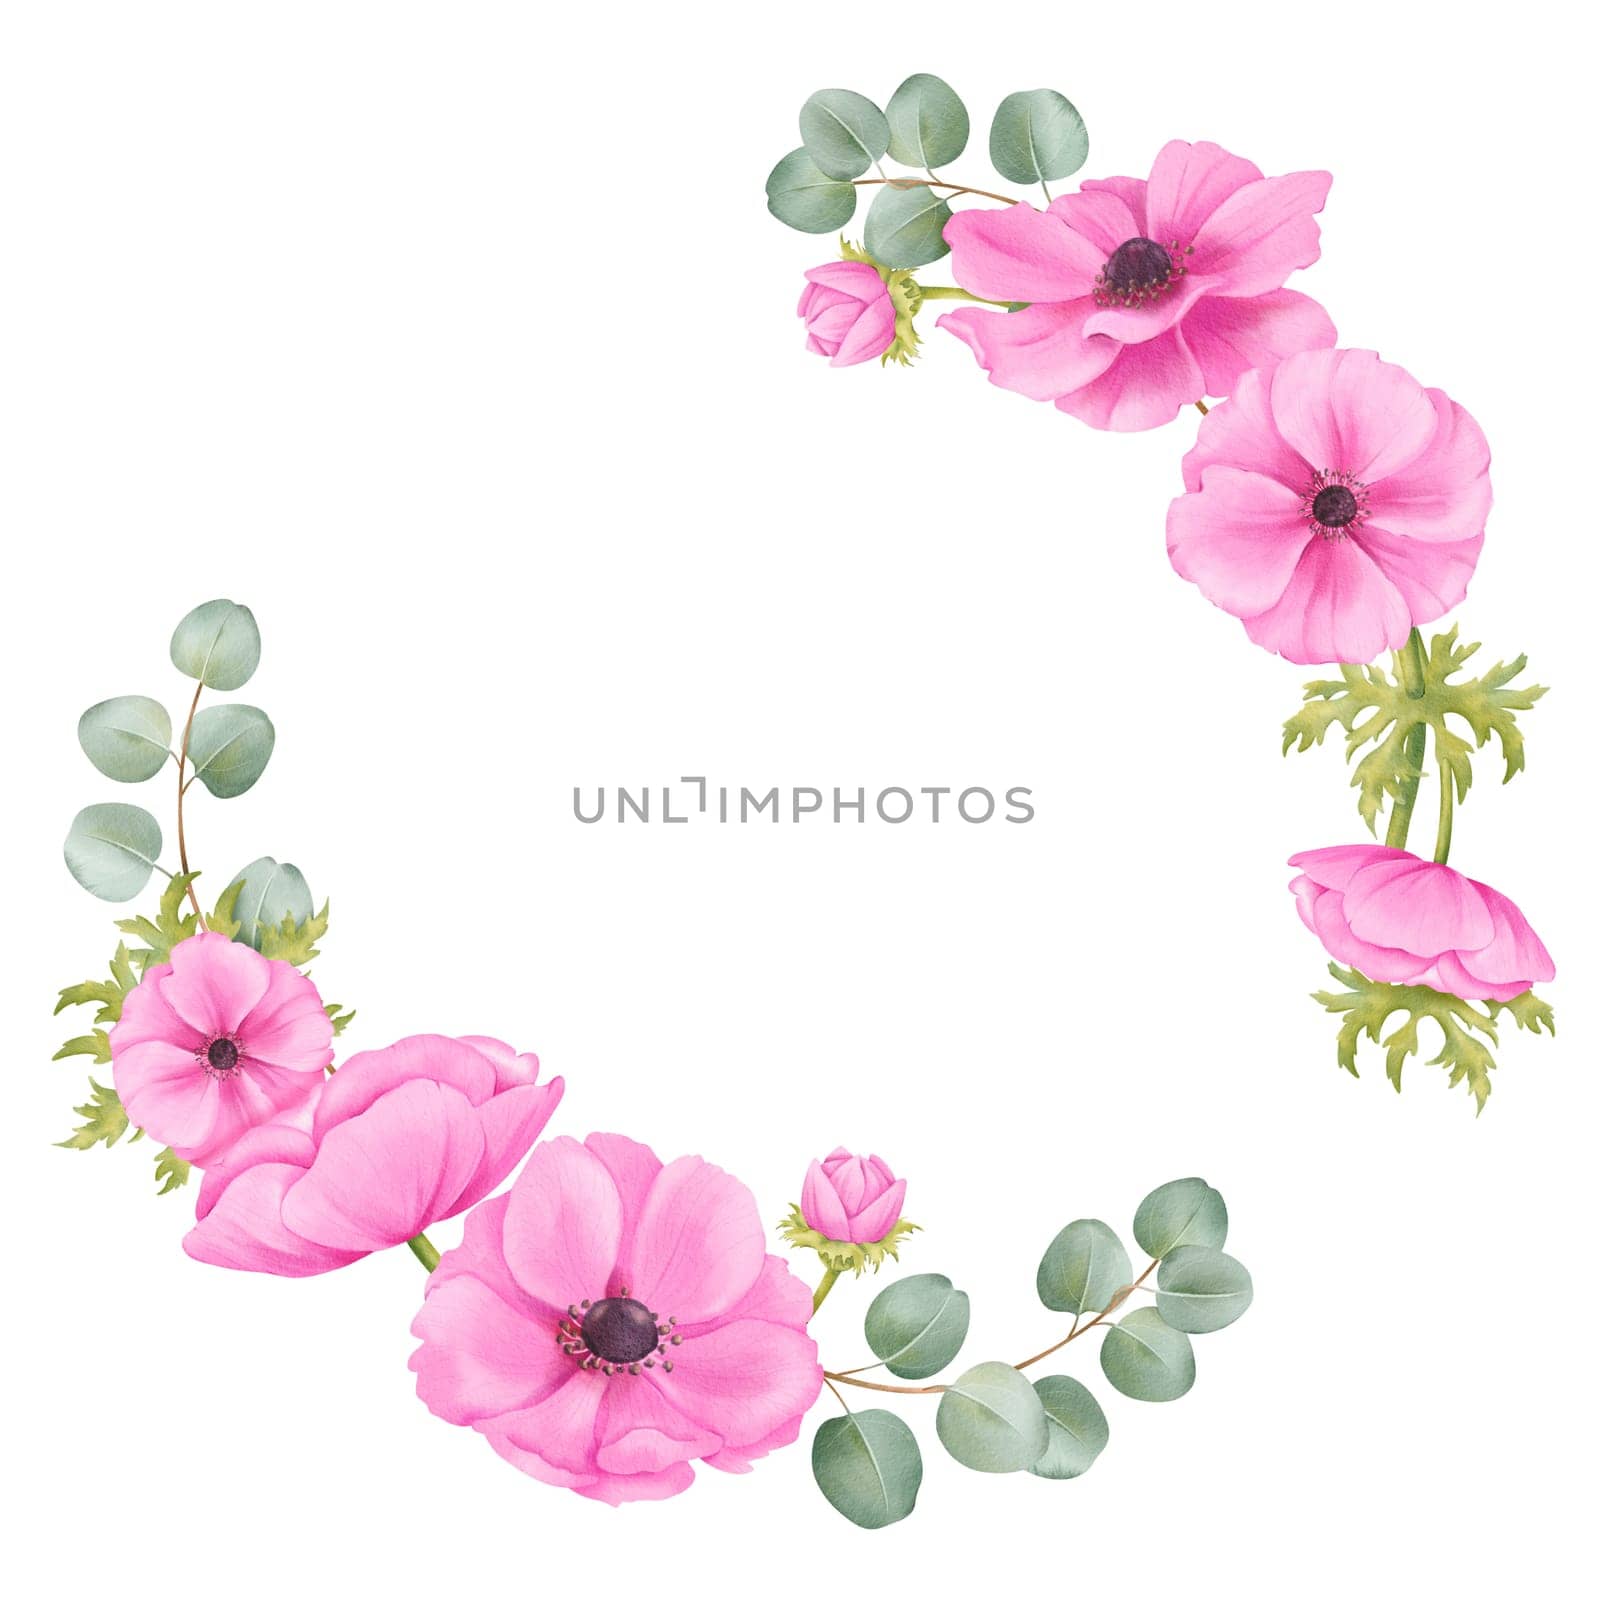 A vibrant circular frame composed of pink anemones, lush greenery, and delicate eucalyptus branches. for invitations, greeting cards, posters, and social media graphics, touch of elegance and charm.